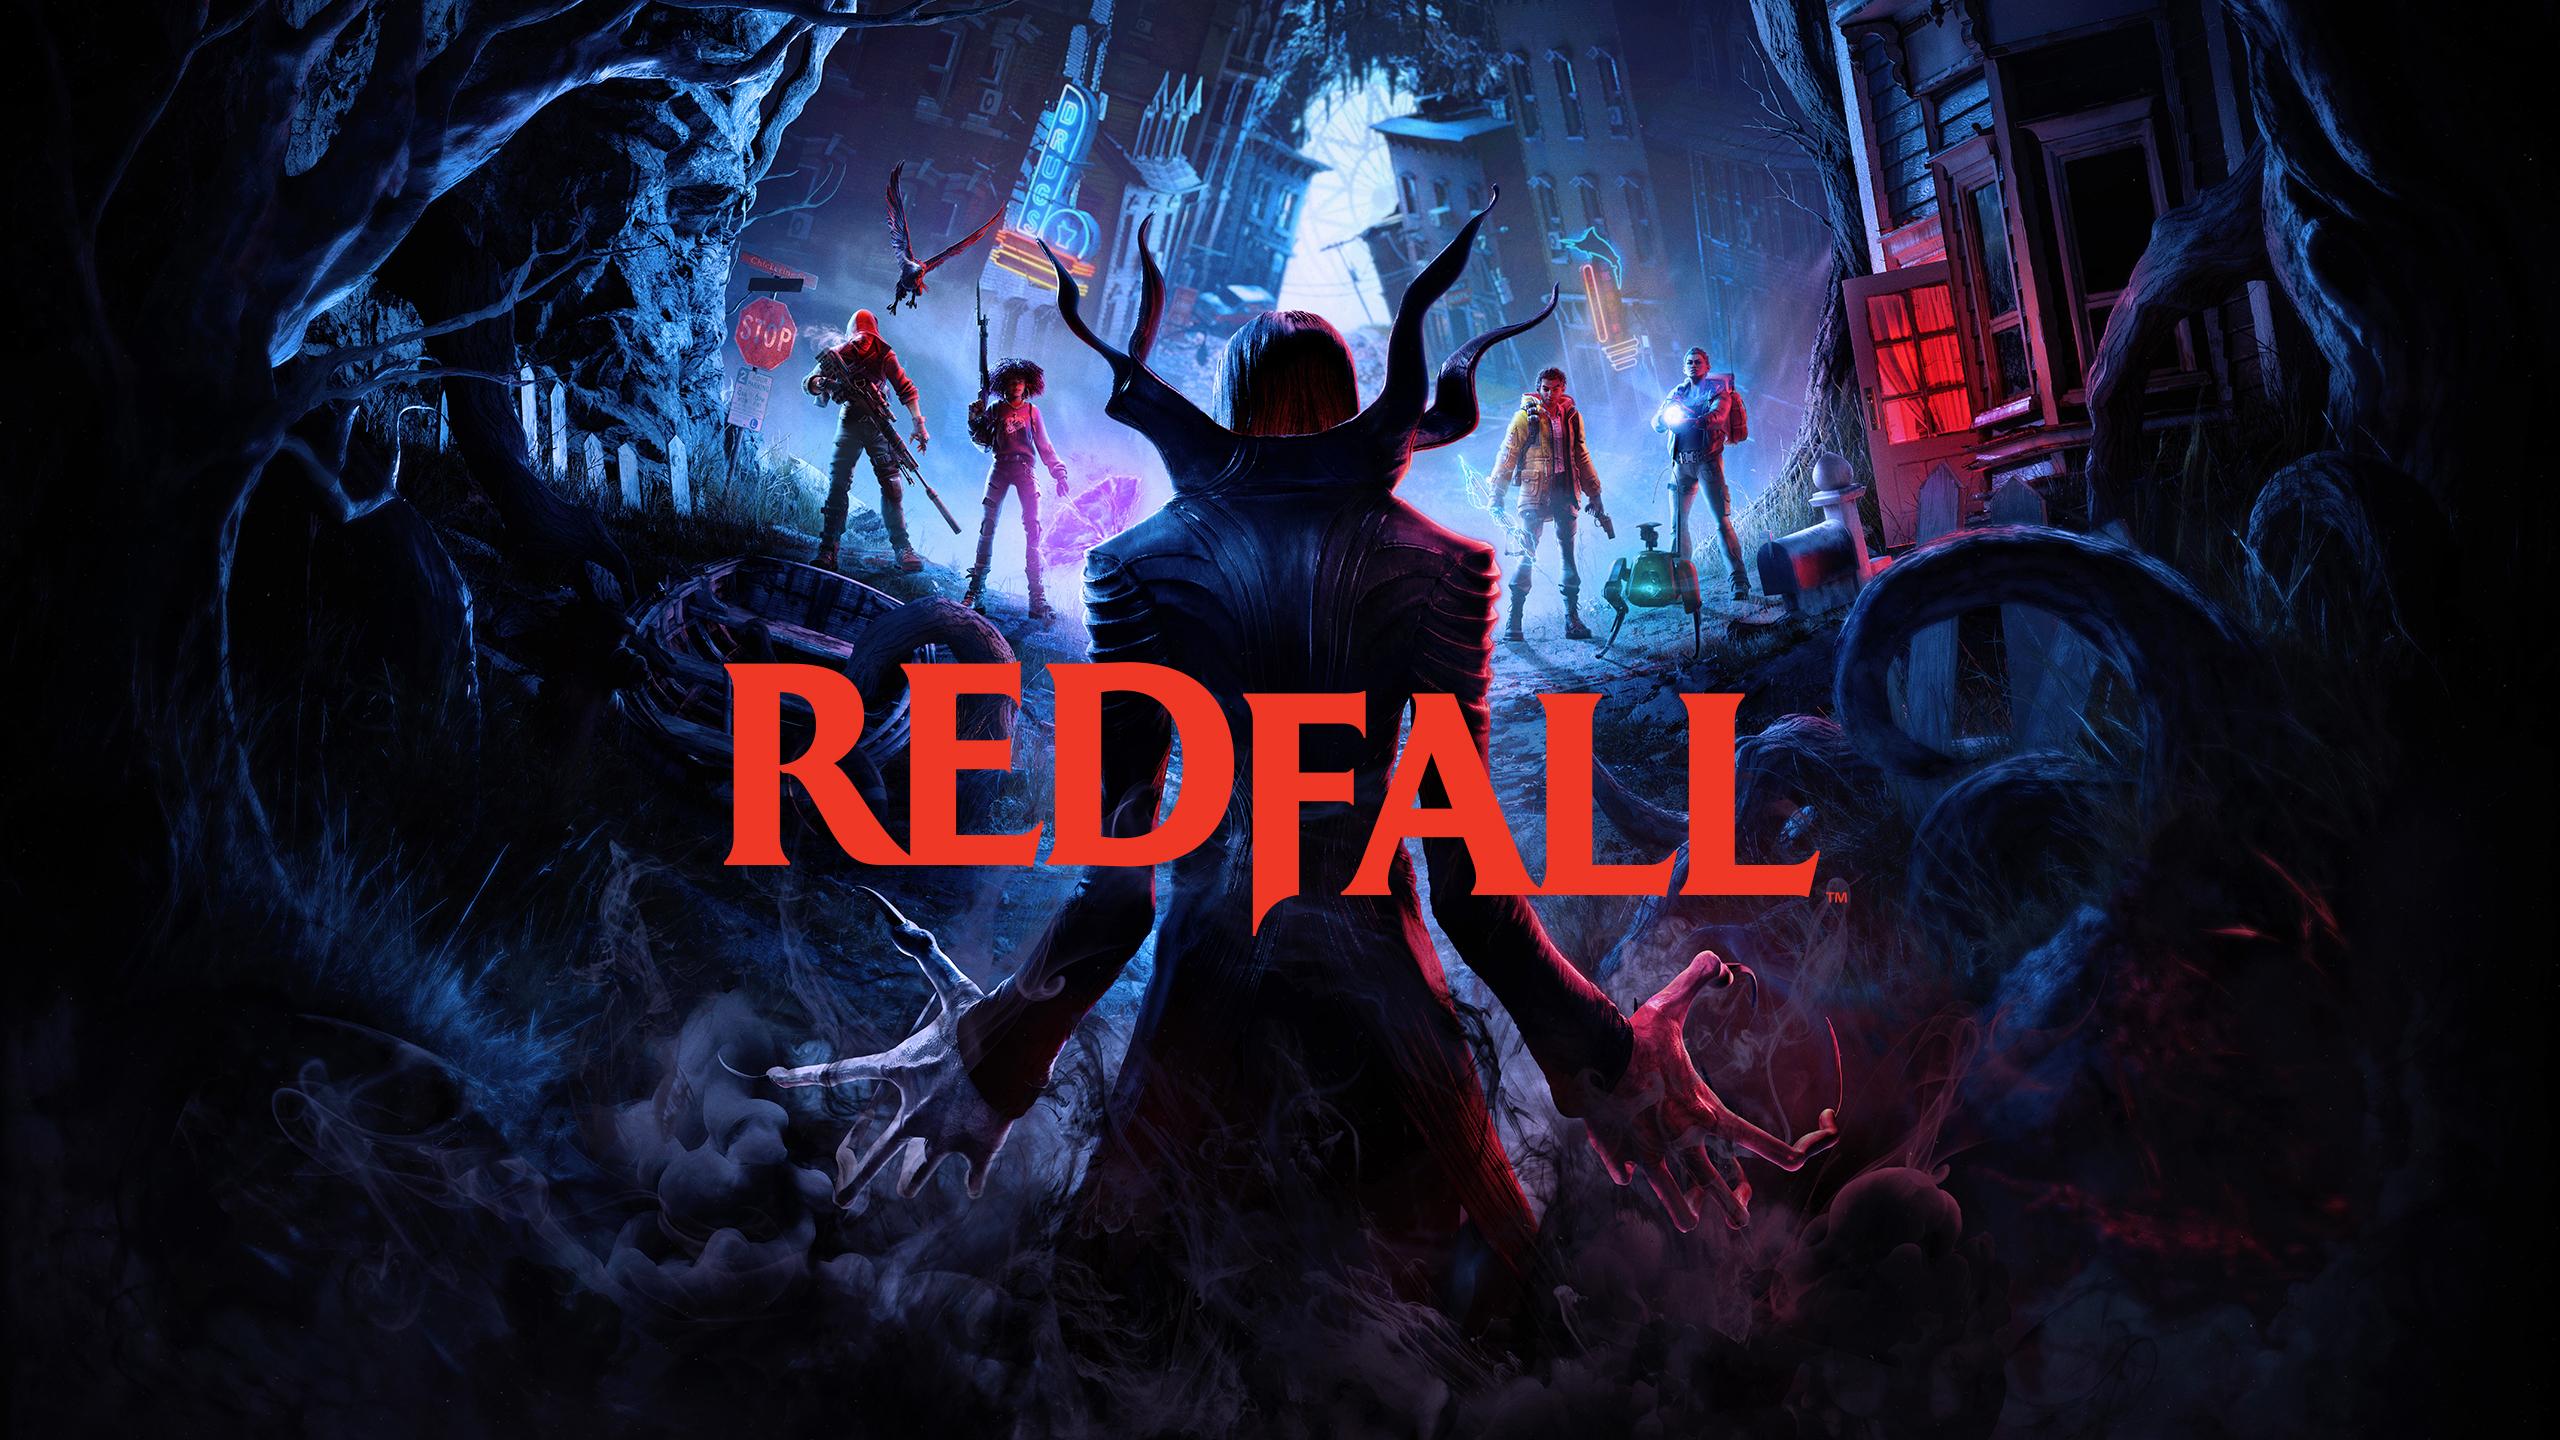 A vampire stands in front of all the redfall characters